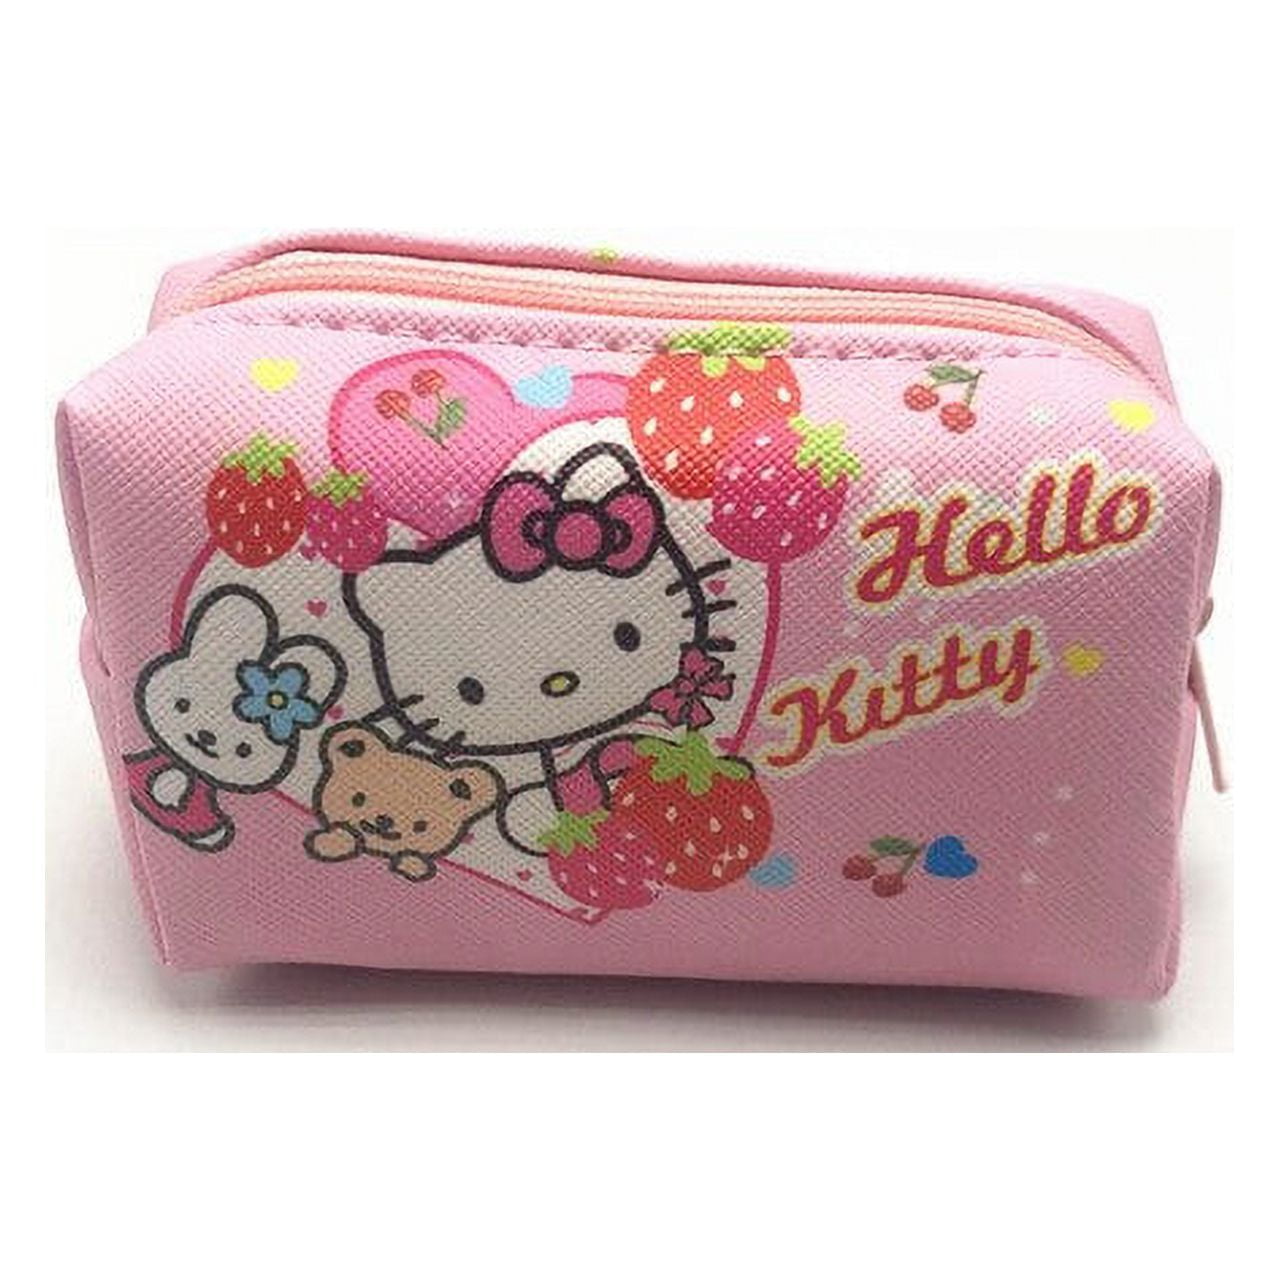 Baby Products Online - Sanrio Hello Kitty New Cute Cartoon Coin Purse Kids  Snack Bag Pu Snack Card Holder Storage Bag - Kideno